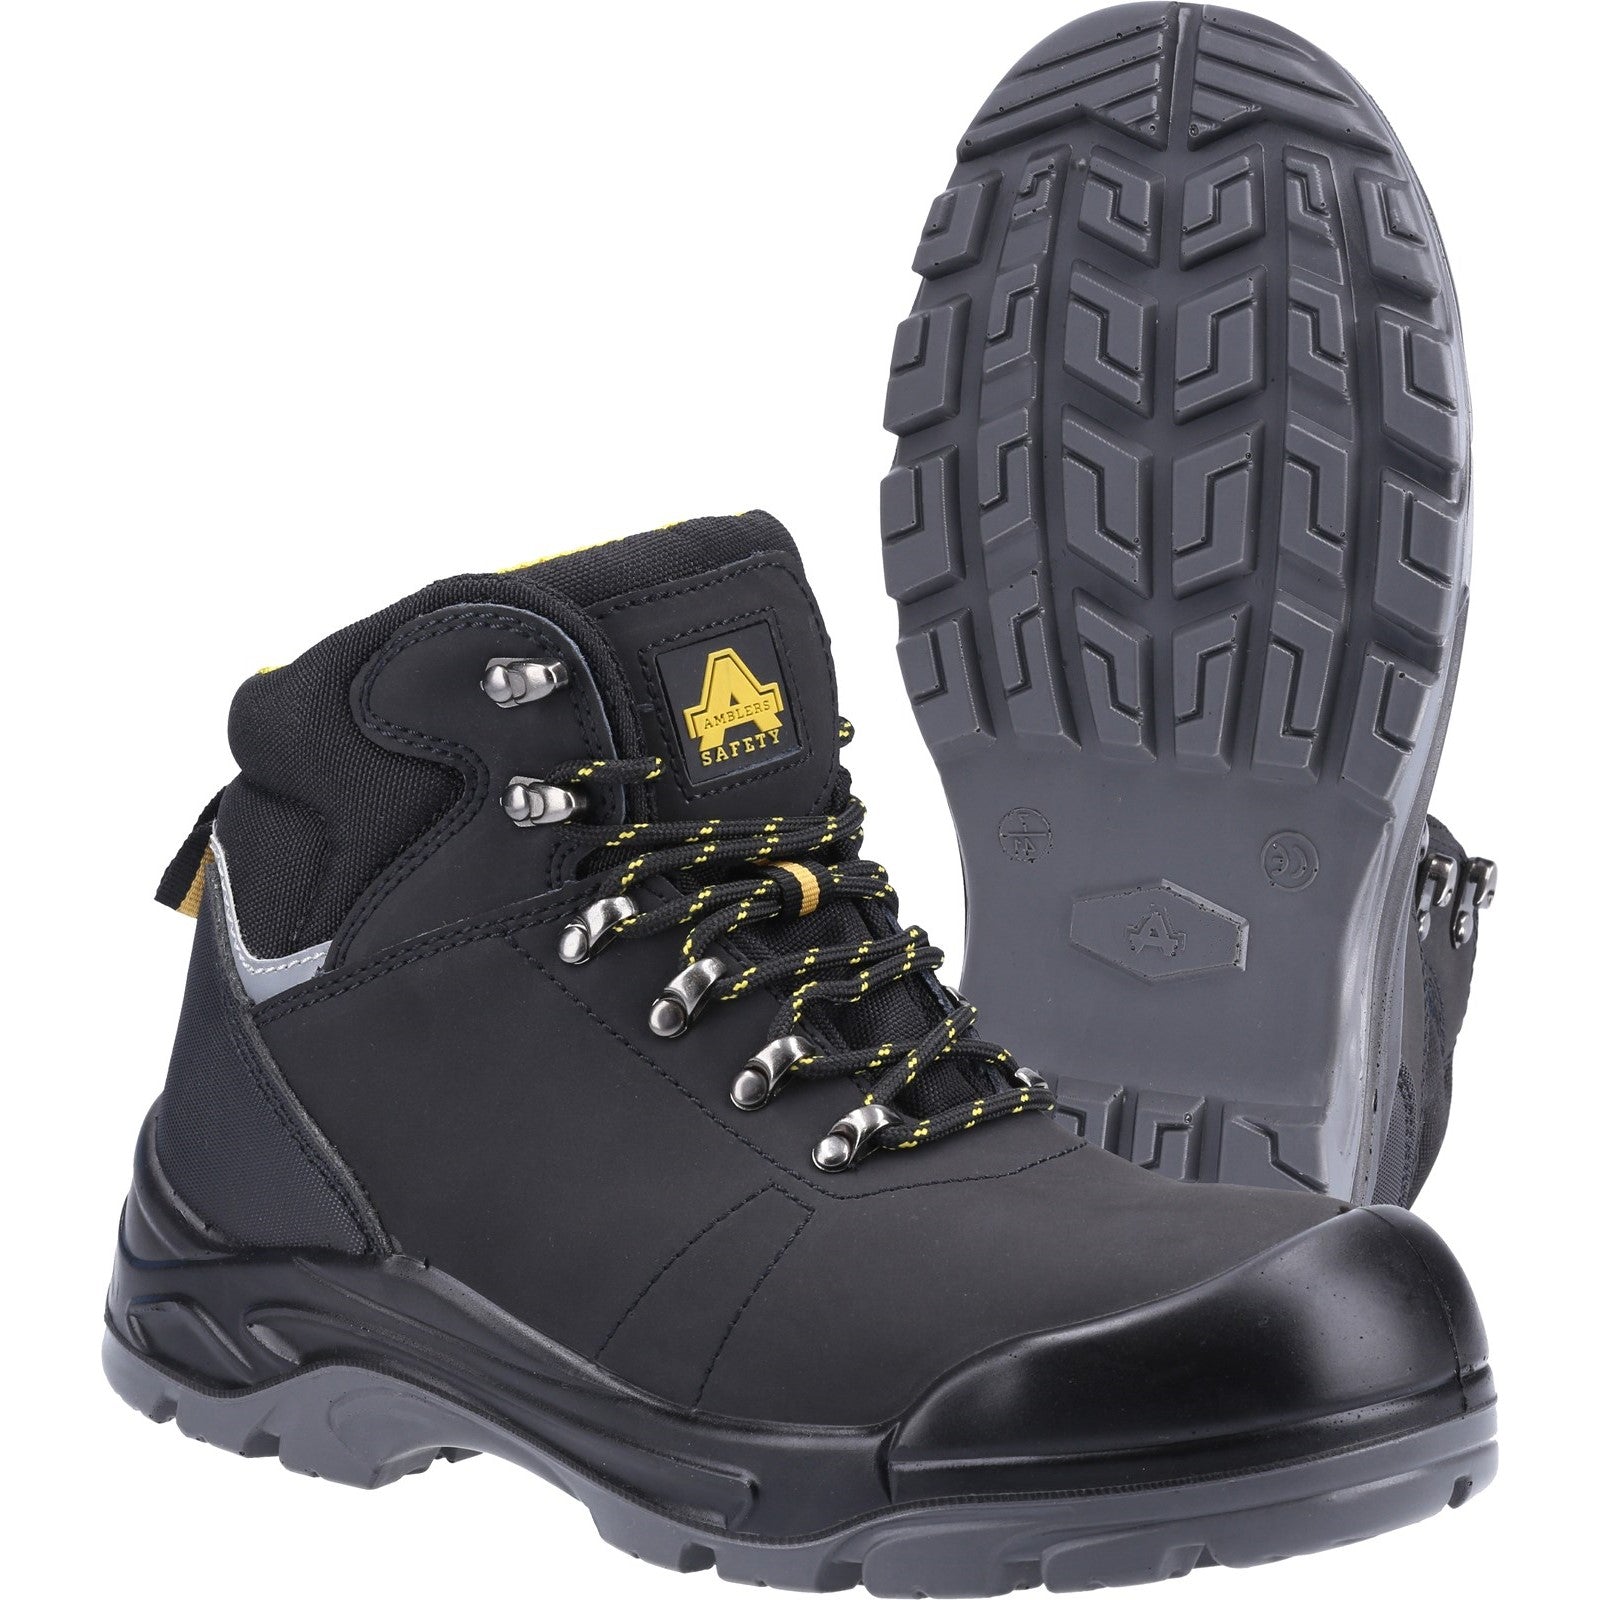 Amblers AS252 Lightweight Water Resistant Leather Safety Boot